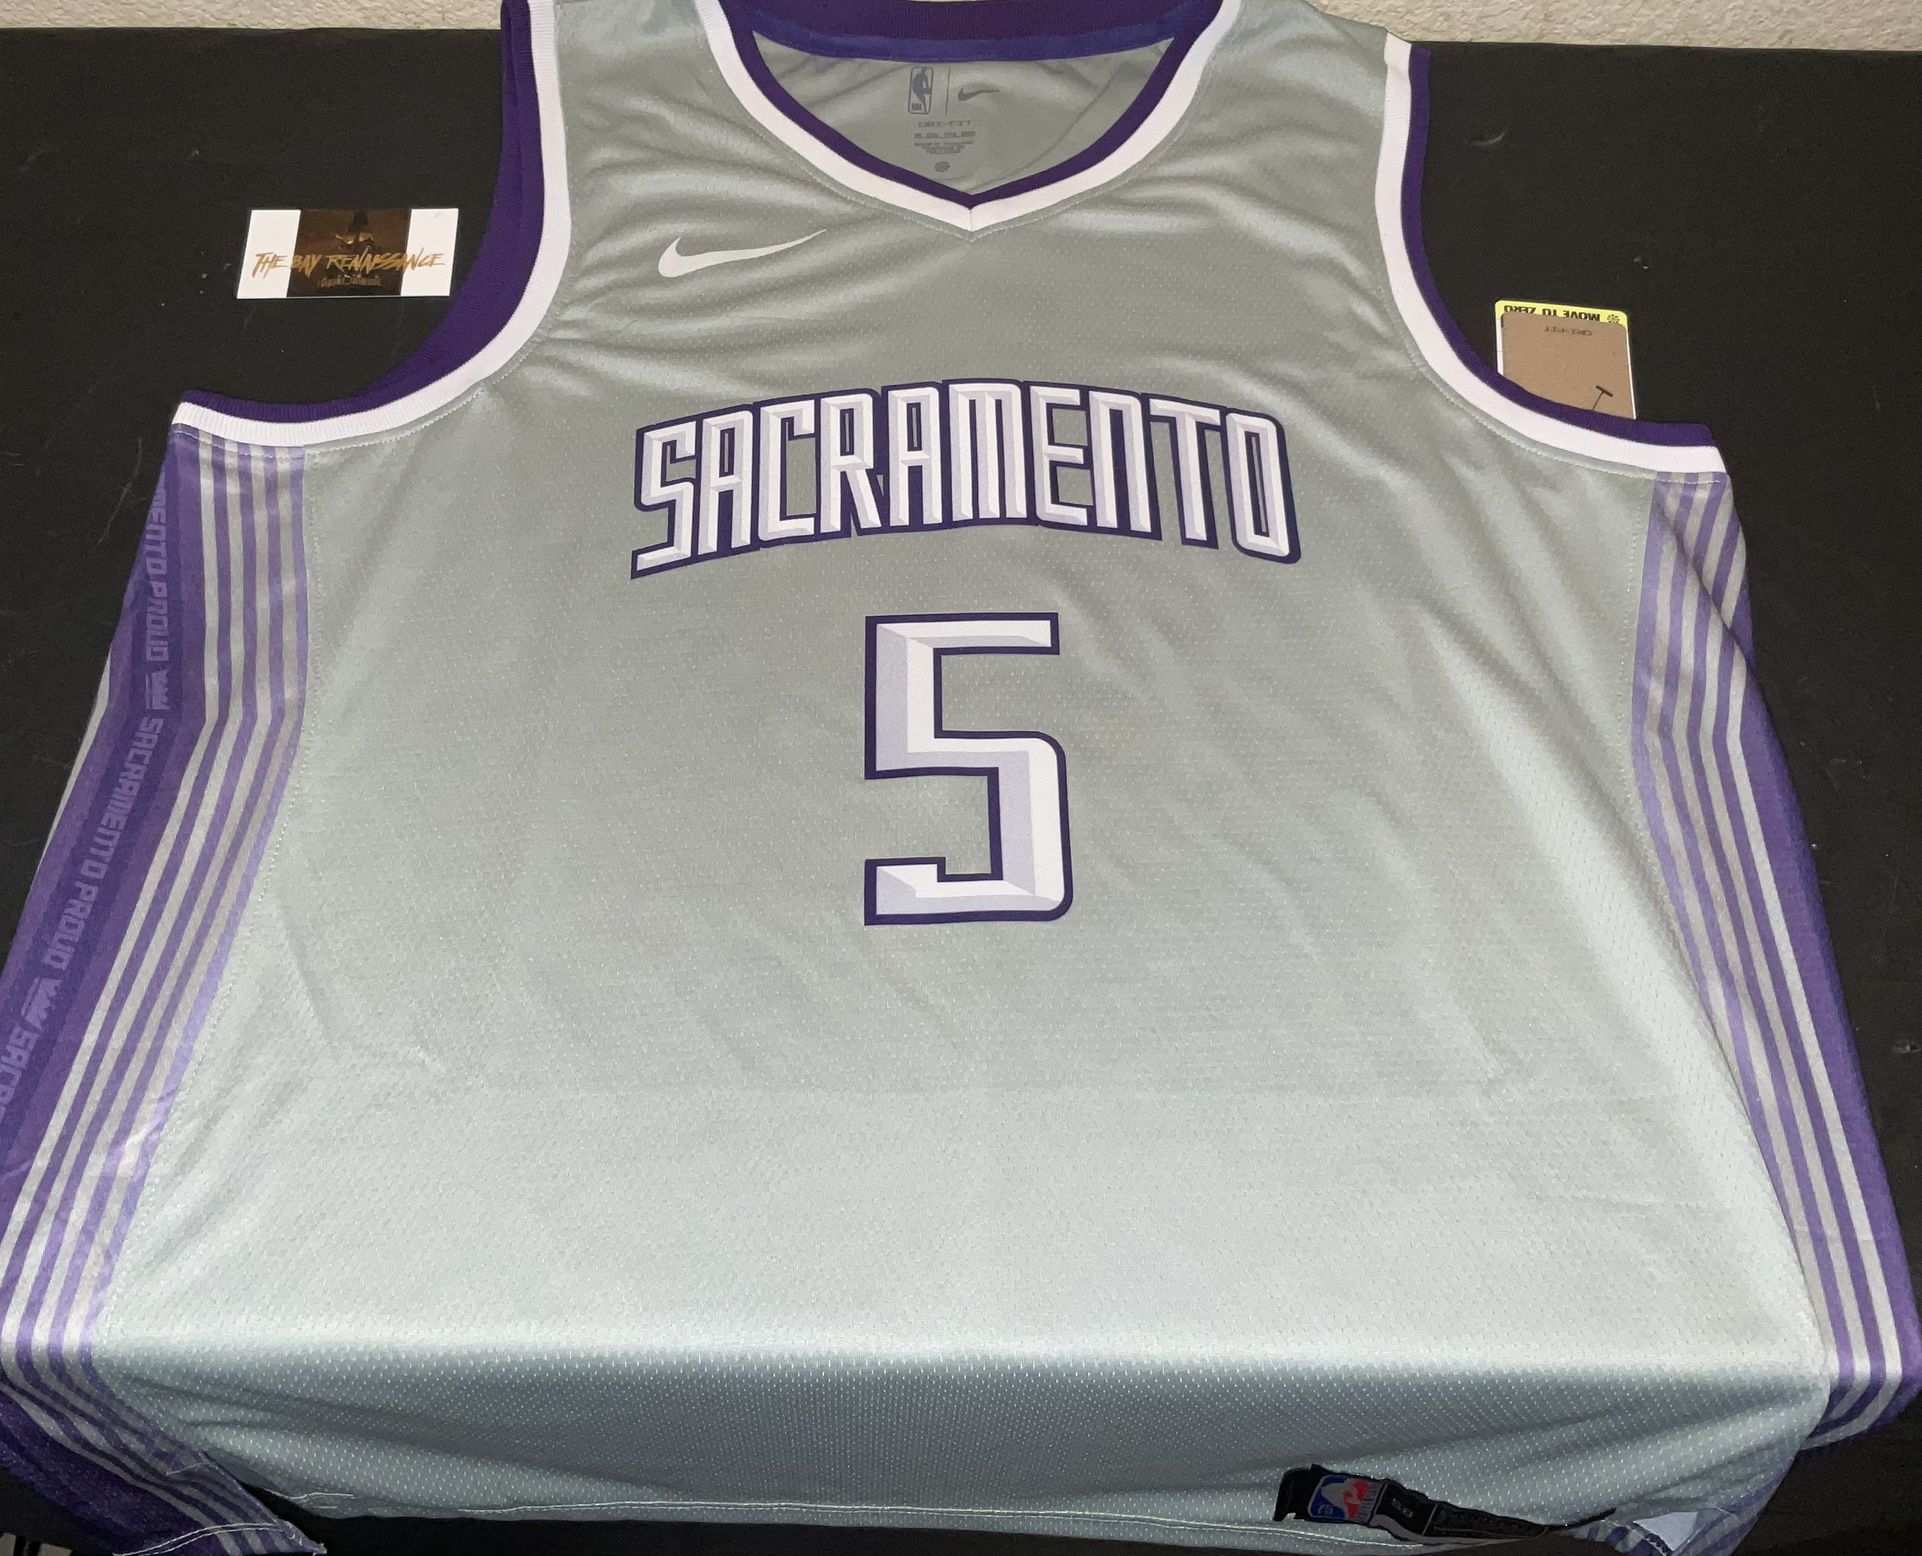 Sacramento Kings DeAaron Fox SacTown City Edition Jersey Adult Men's XXL  N.W.T “BeamTeam” Pacific Division Champions for Sale in Sacramento, CA -  OfferUp